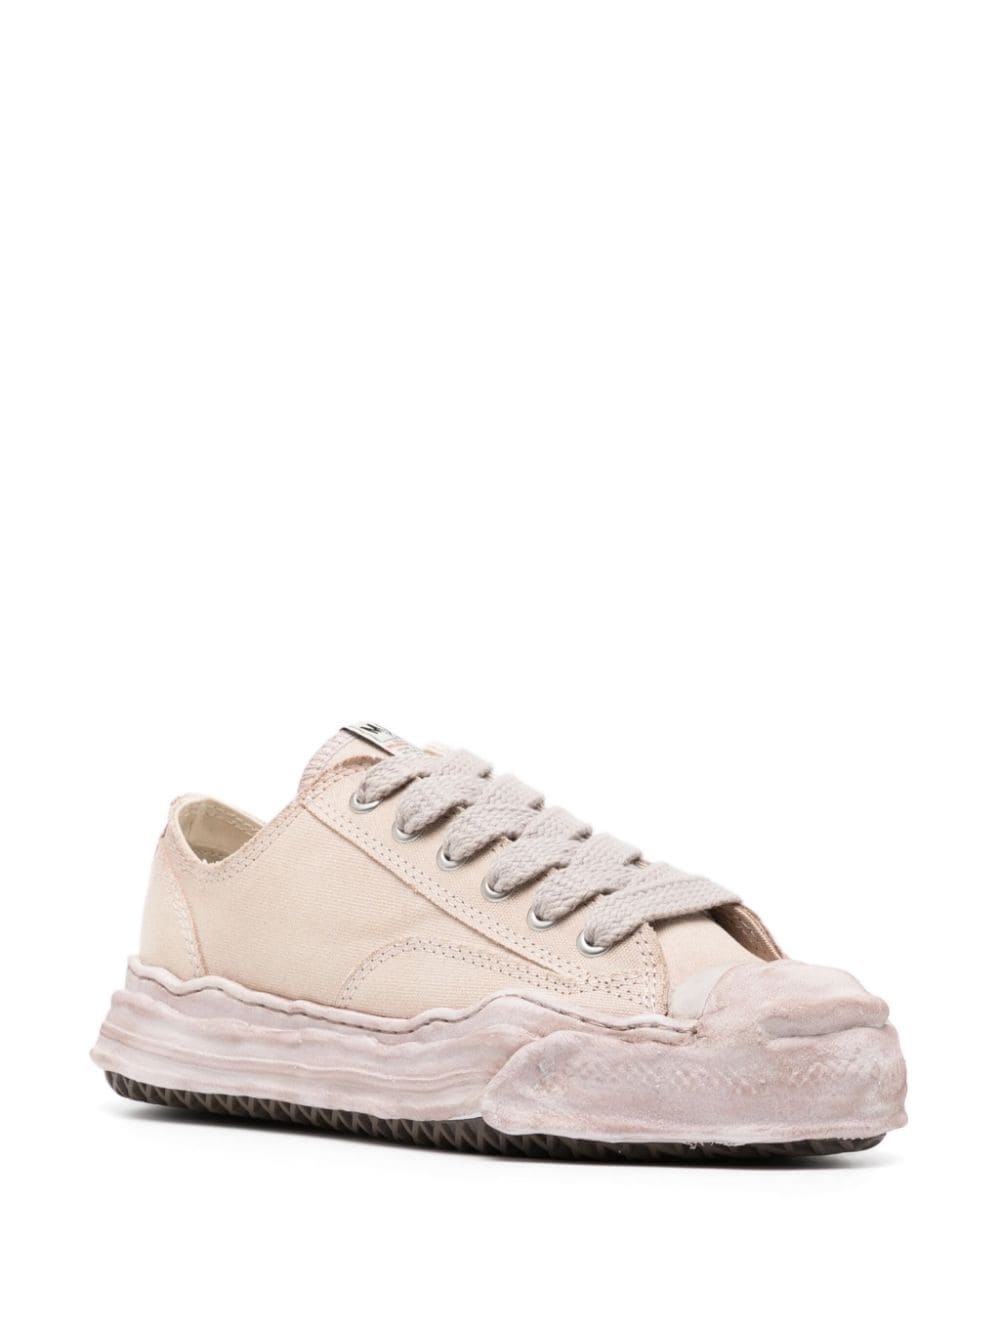 Hank canvas lace-up sneakers - 2